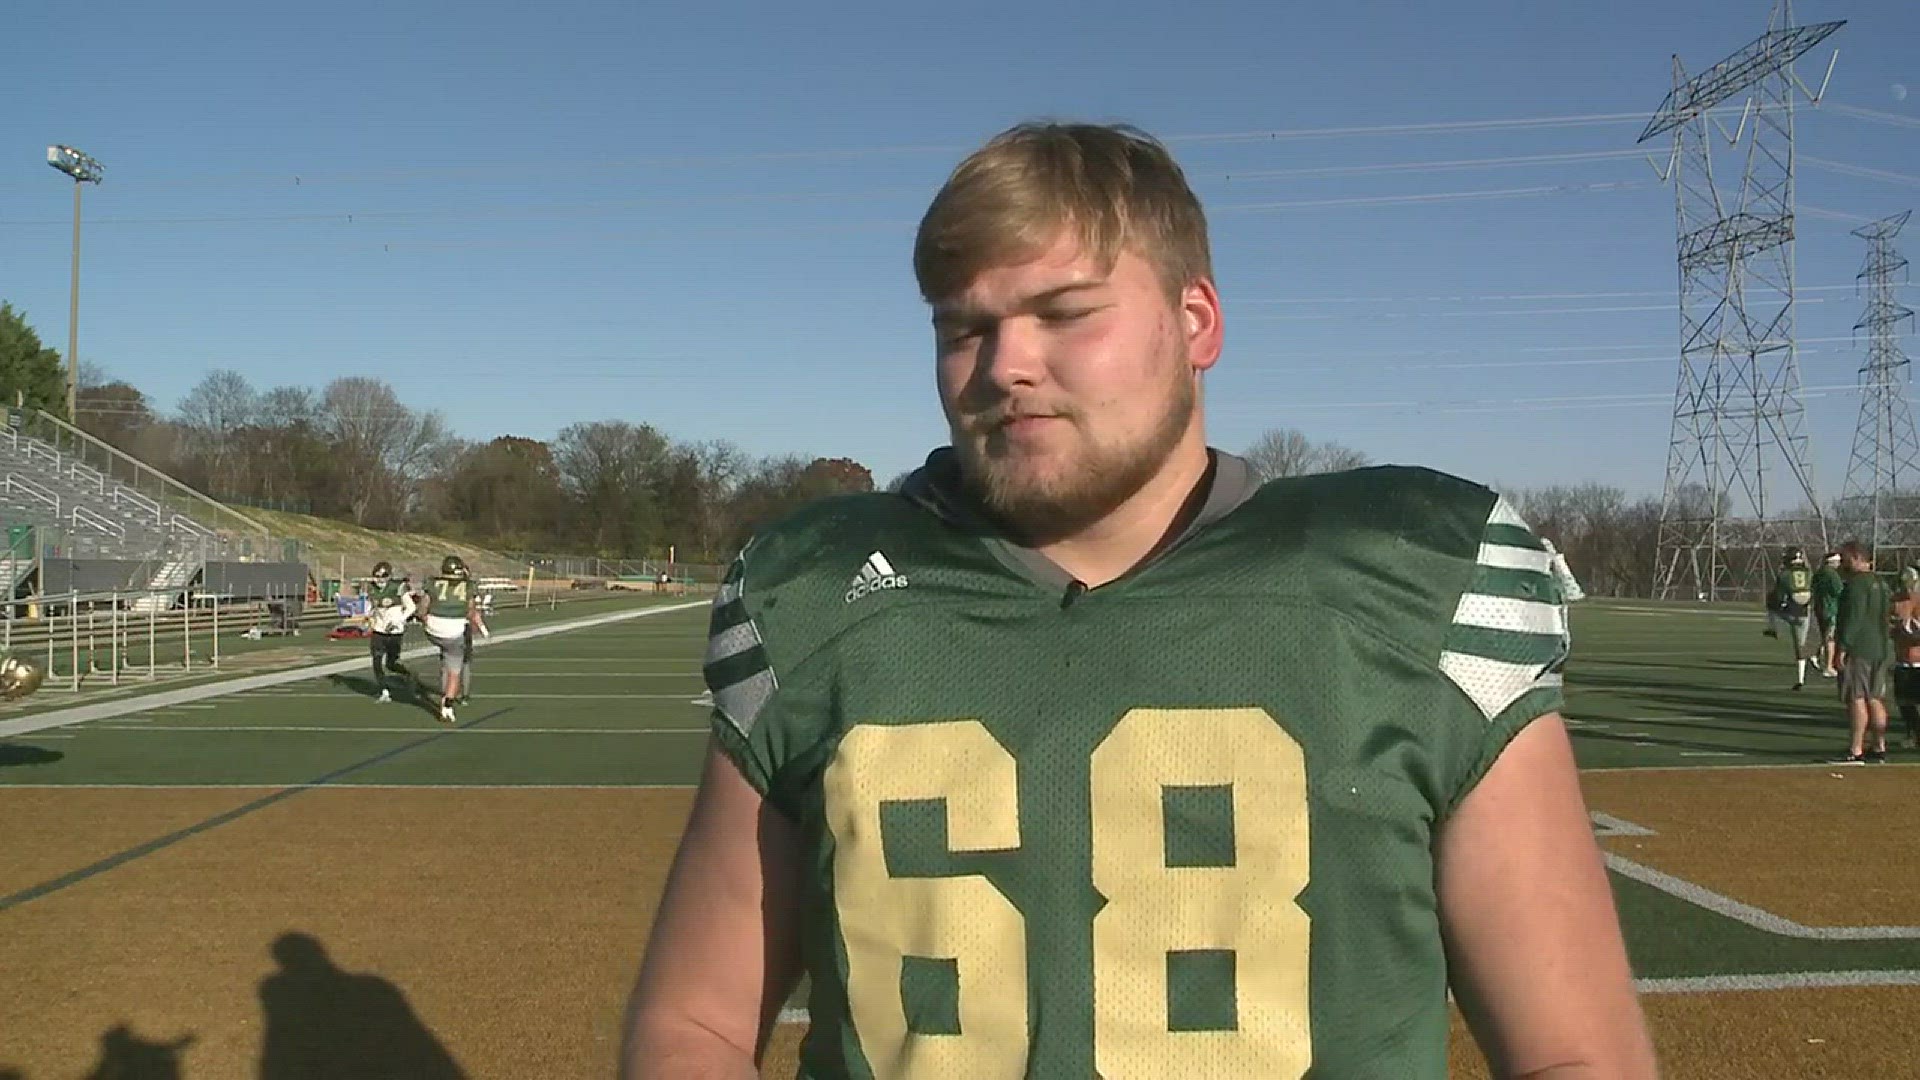 WBIR's Luke Slabaugh interviewed Cade Mays in the week leading up to Knoxville Catholic's state championship win, prior to his top three announcement. Mays discusses his top three schools - Clemson, Ohio State and Georgia.